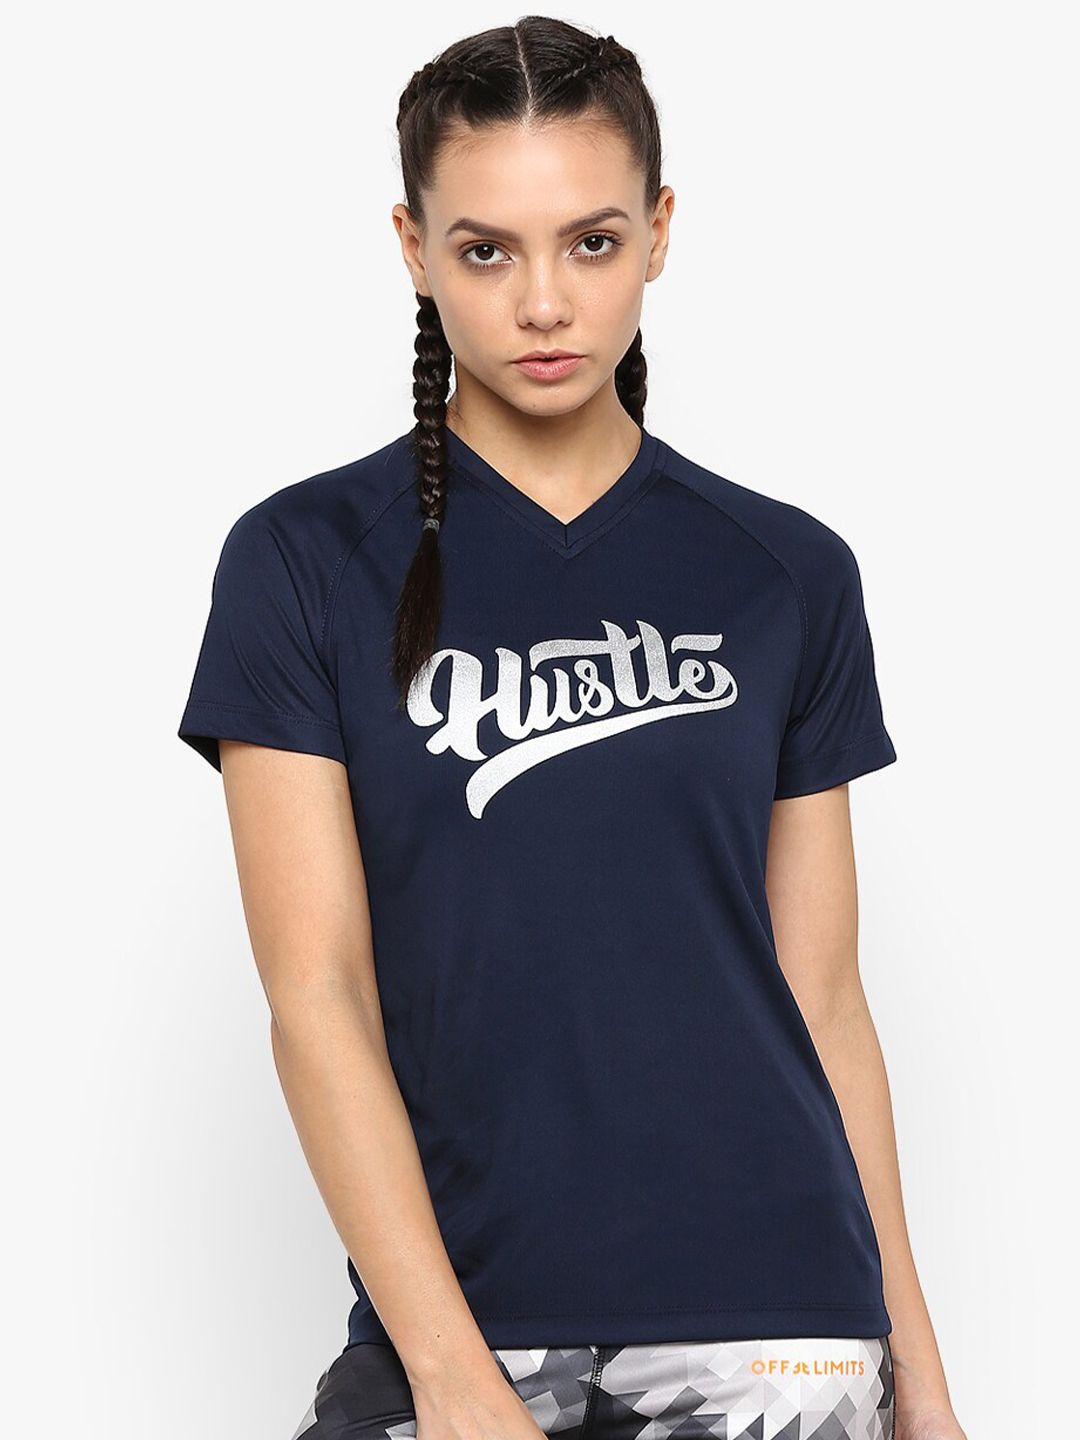 OFF LIMITS Women Navy Blue Typography Printed V-Neck Slim Fit Sports T-shirt Price in India